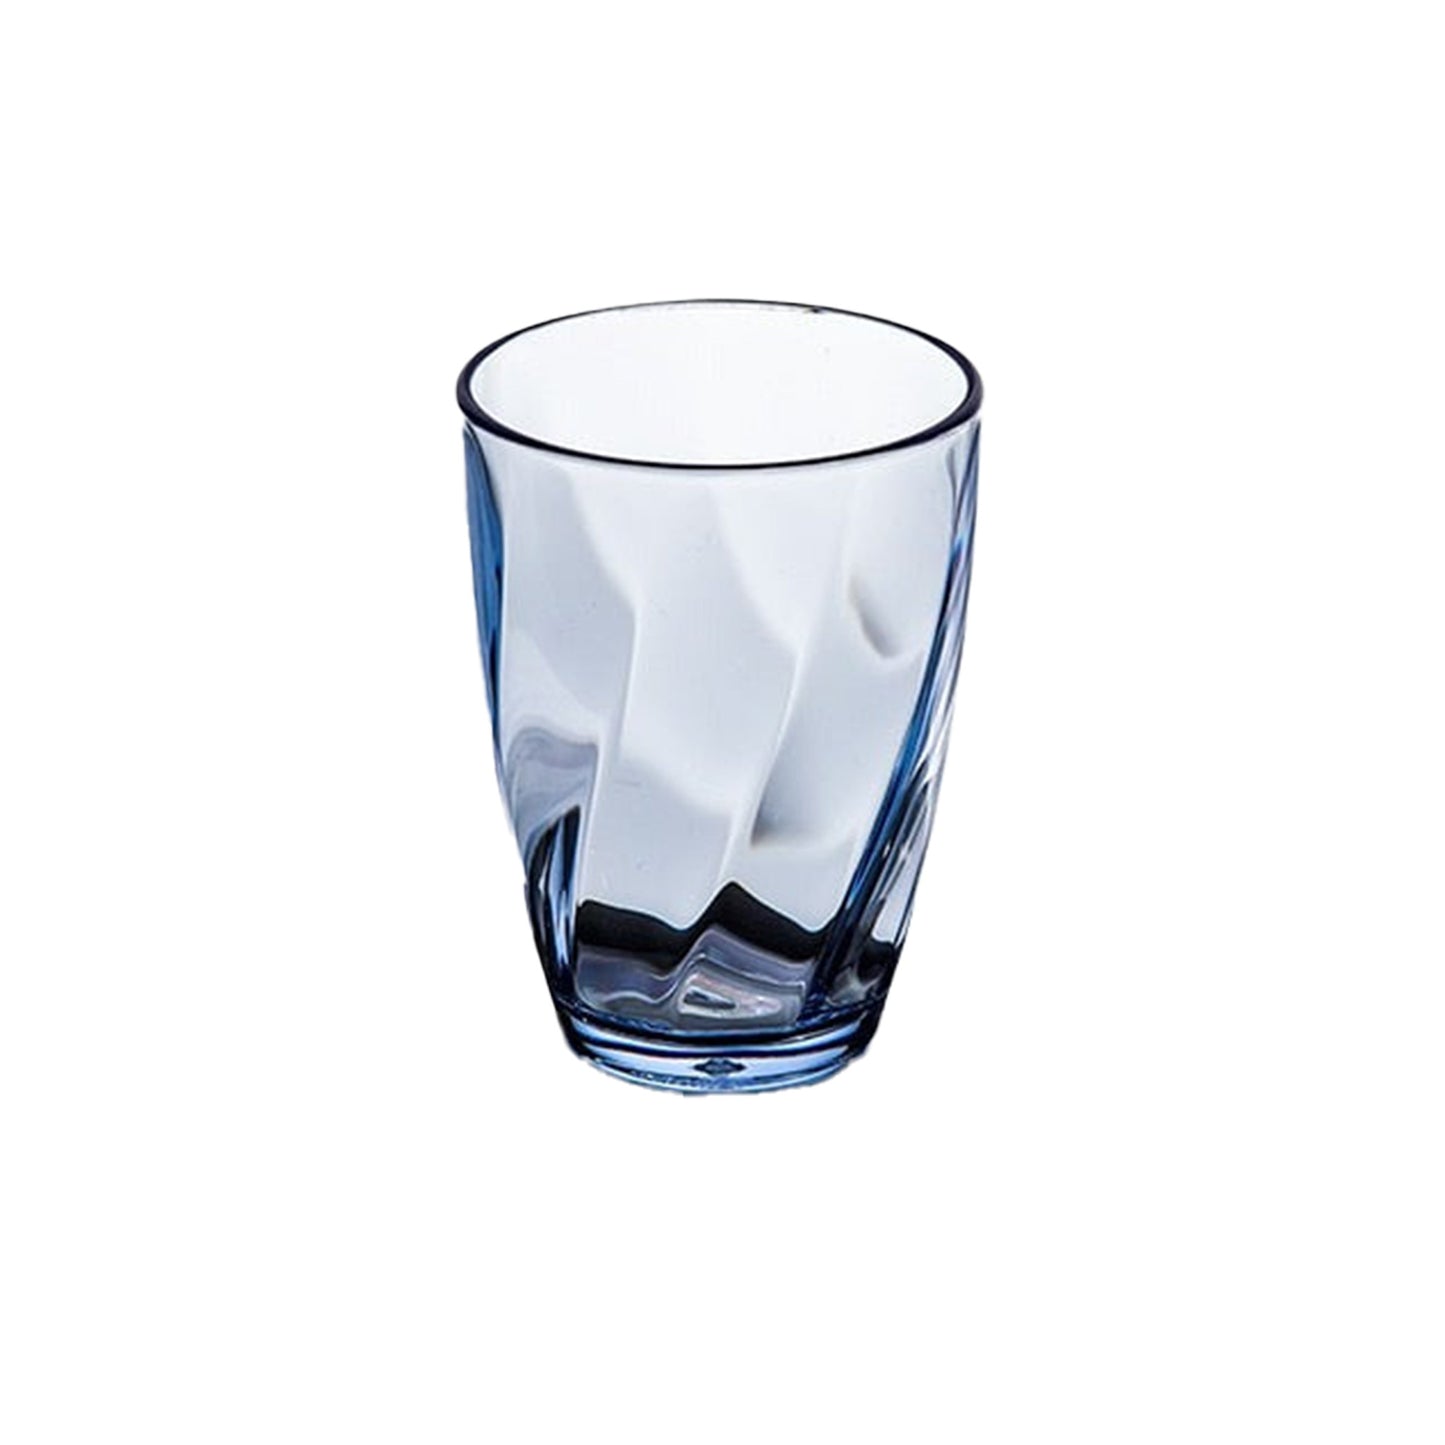 Blue Acrylic Cup Glasses Set of 6